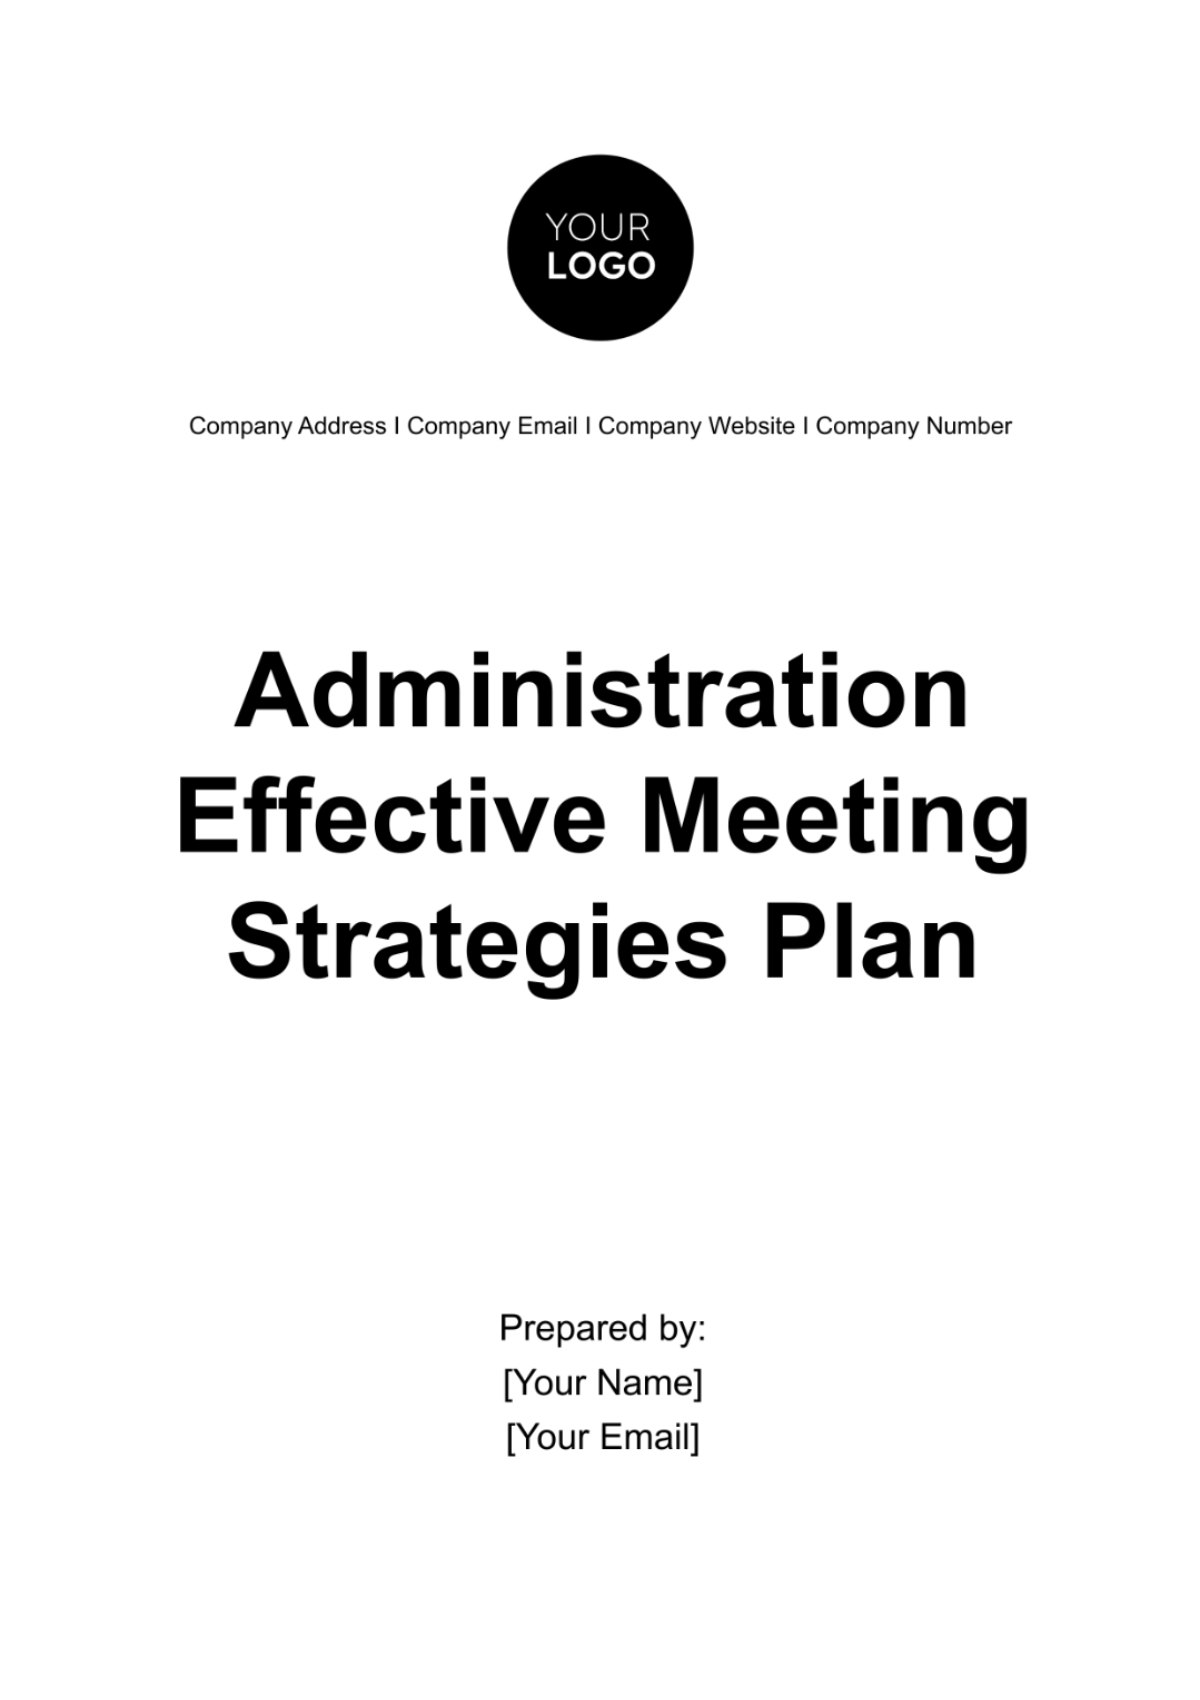 Free Administration Effective Meeting Strategies Plan Template